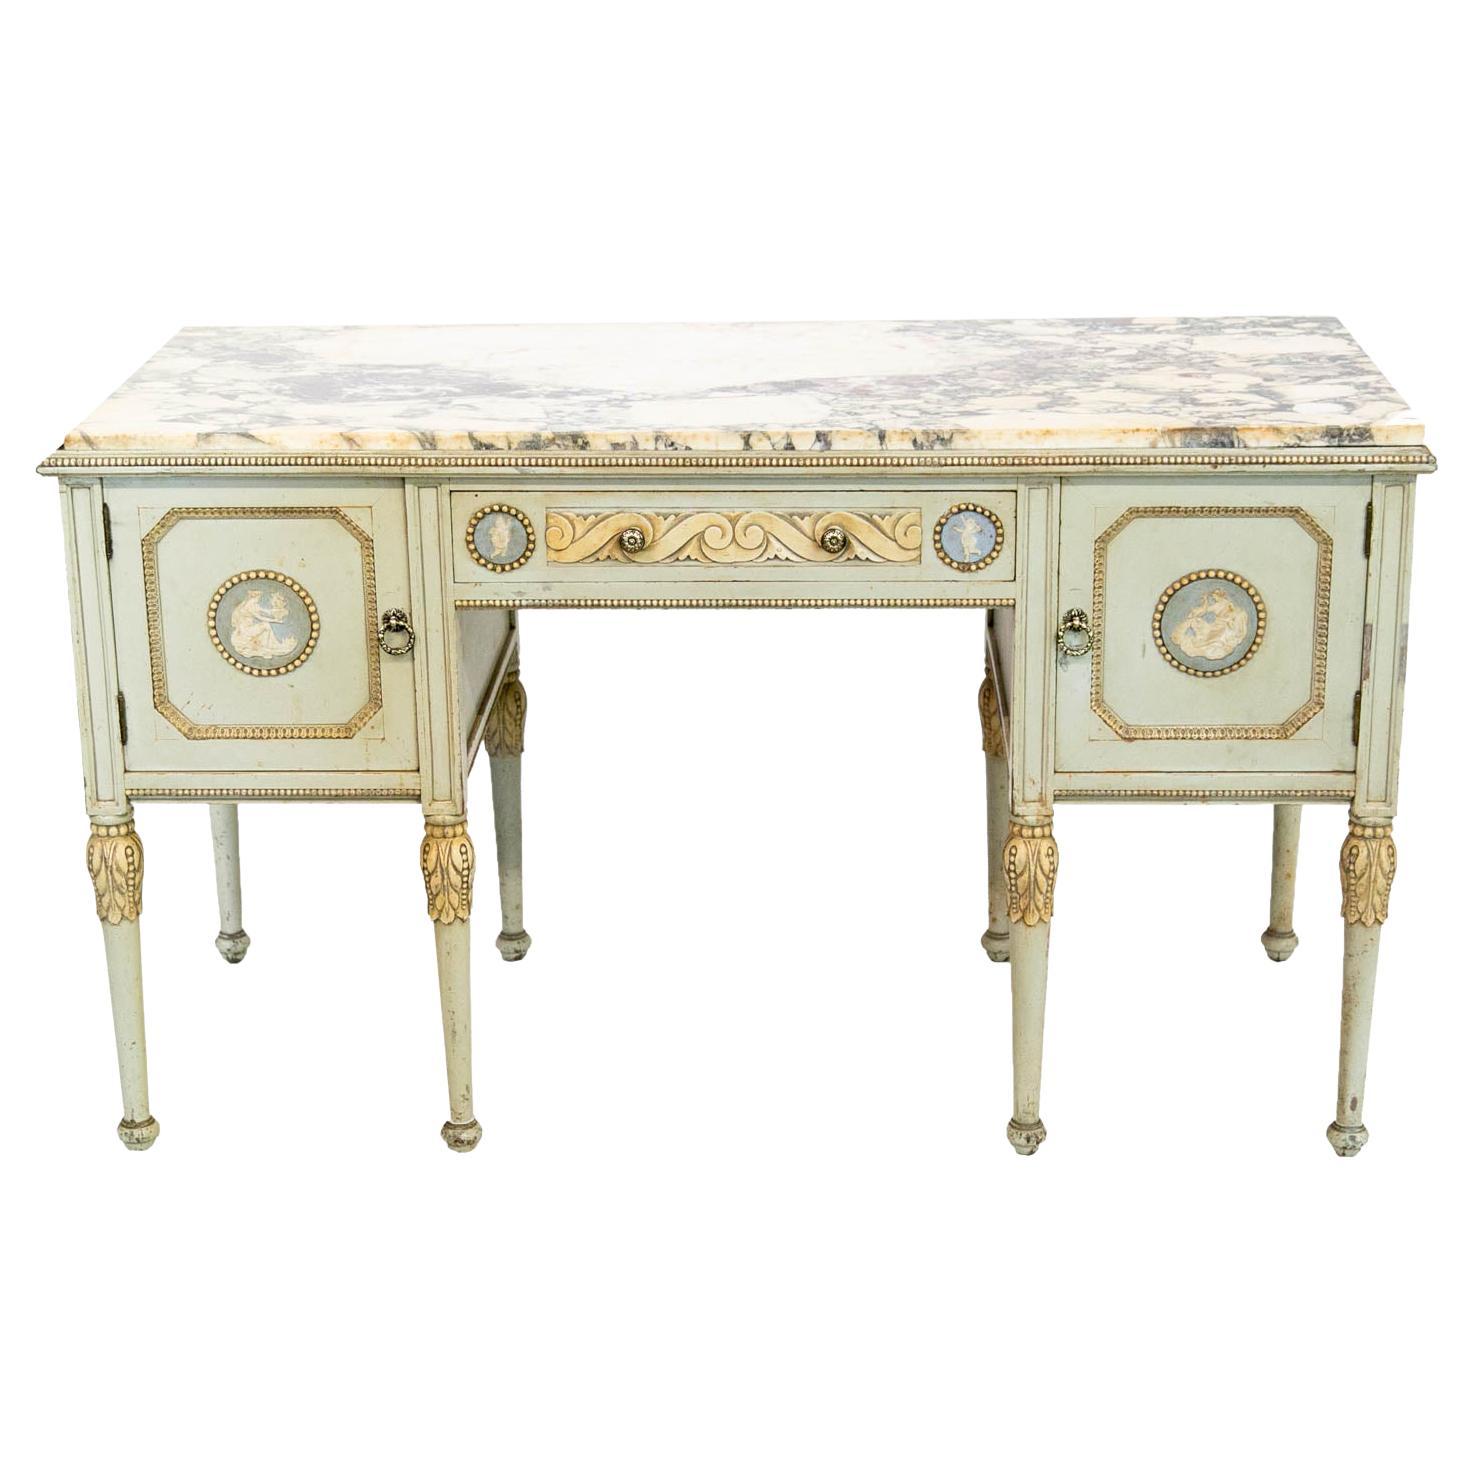 English Marble Top Console Table